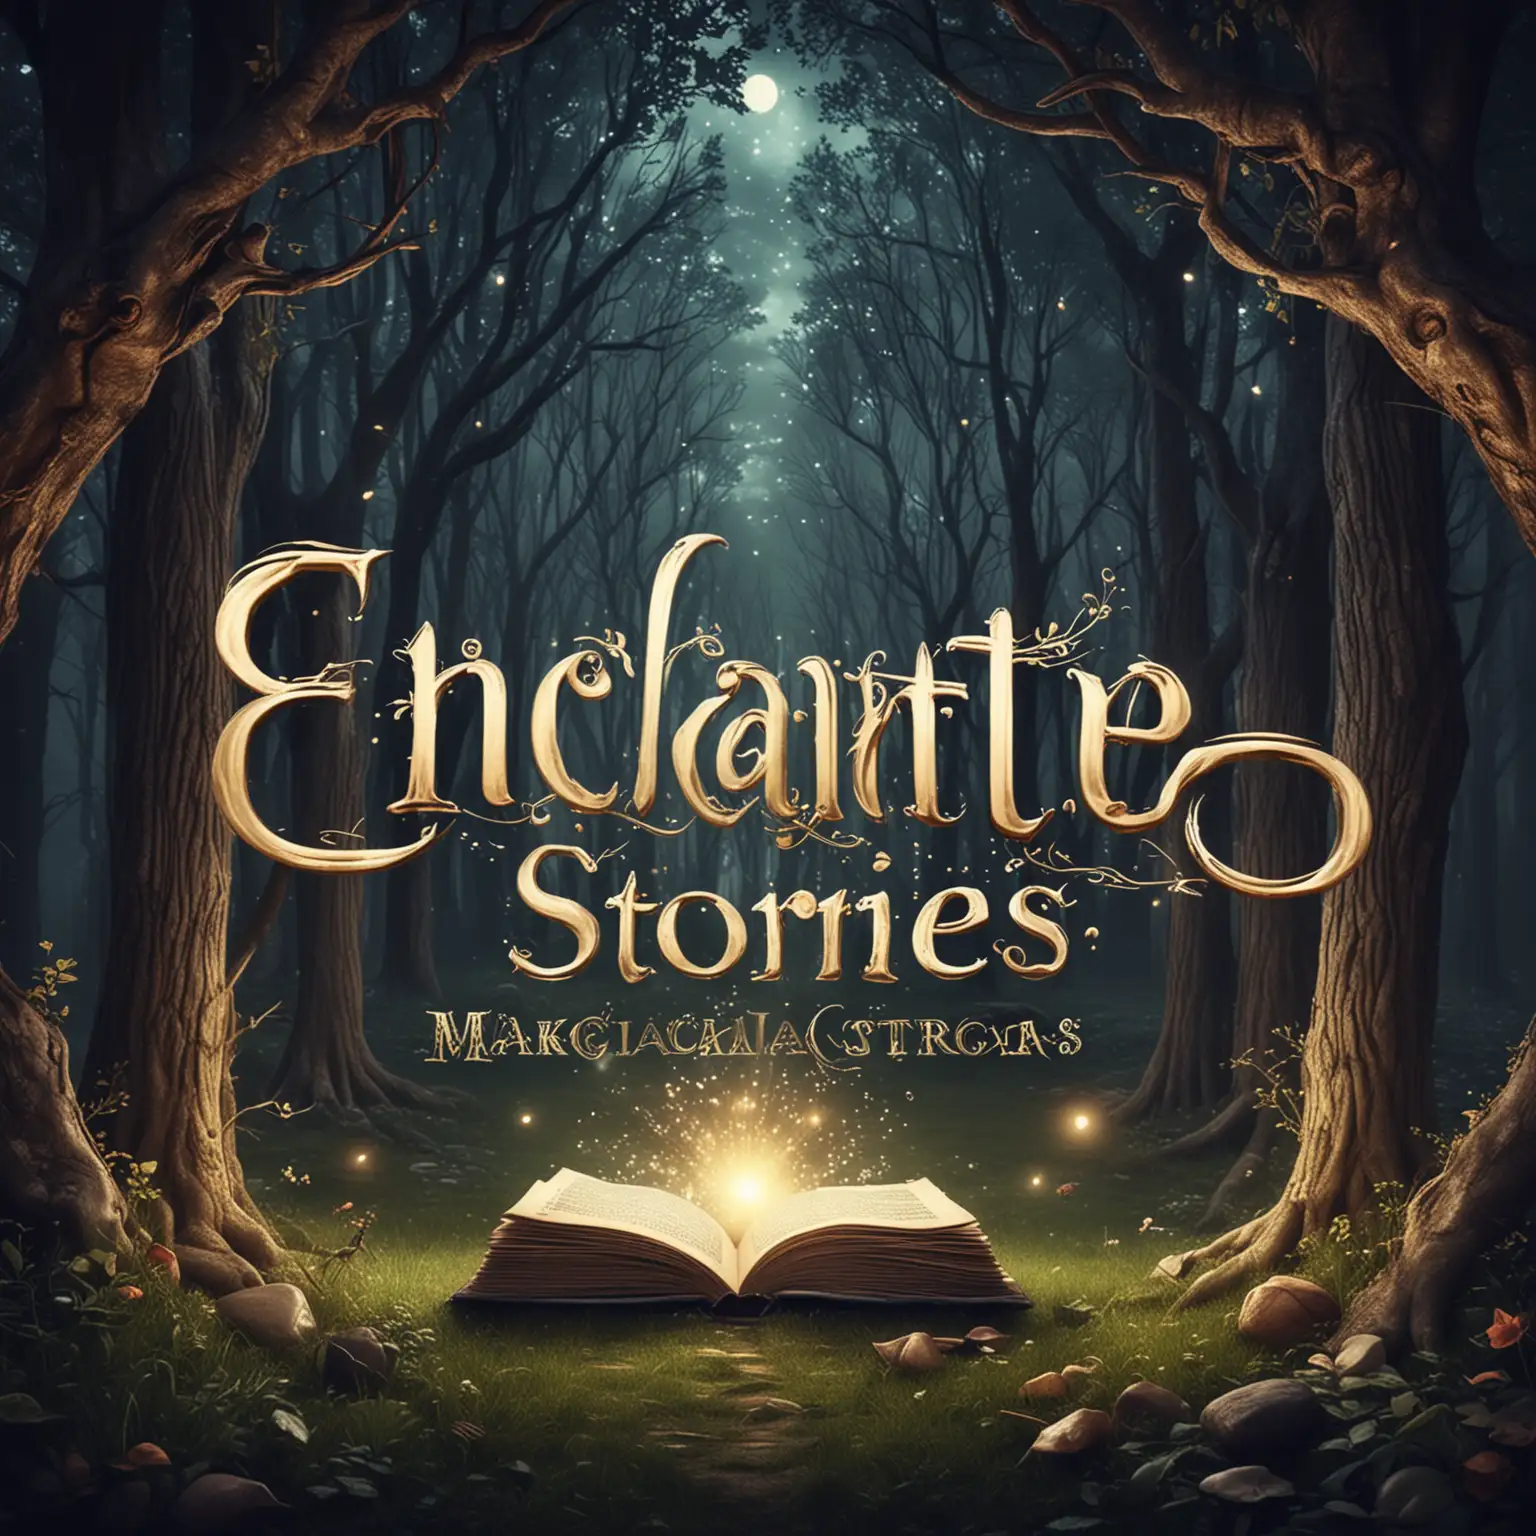 Create logo with title Enchanted Stories, Make it look magical, make correct text